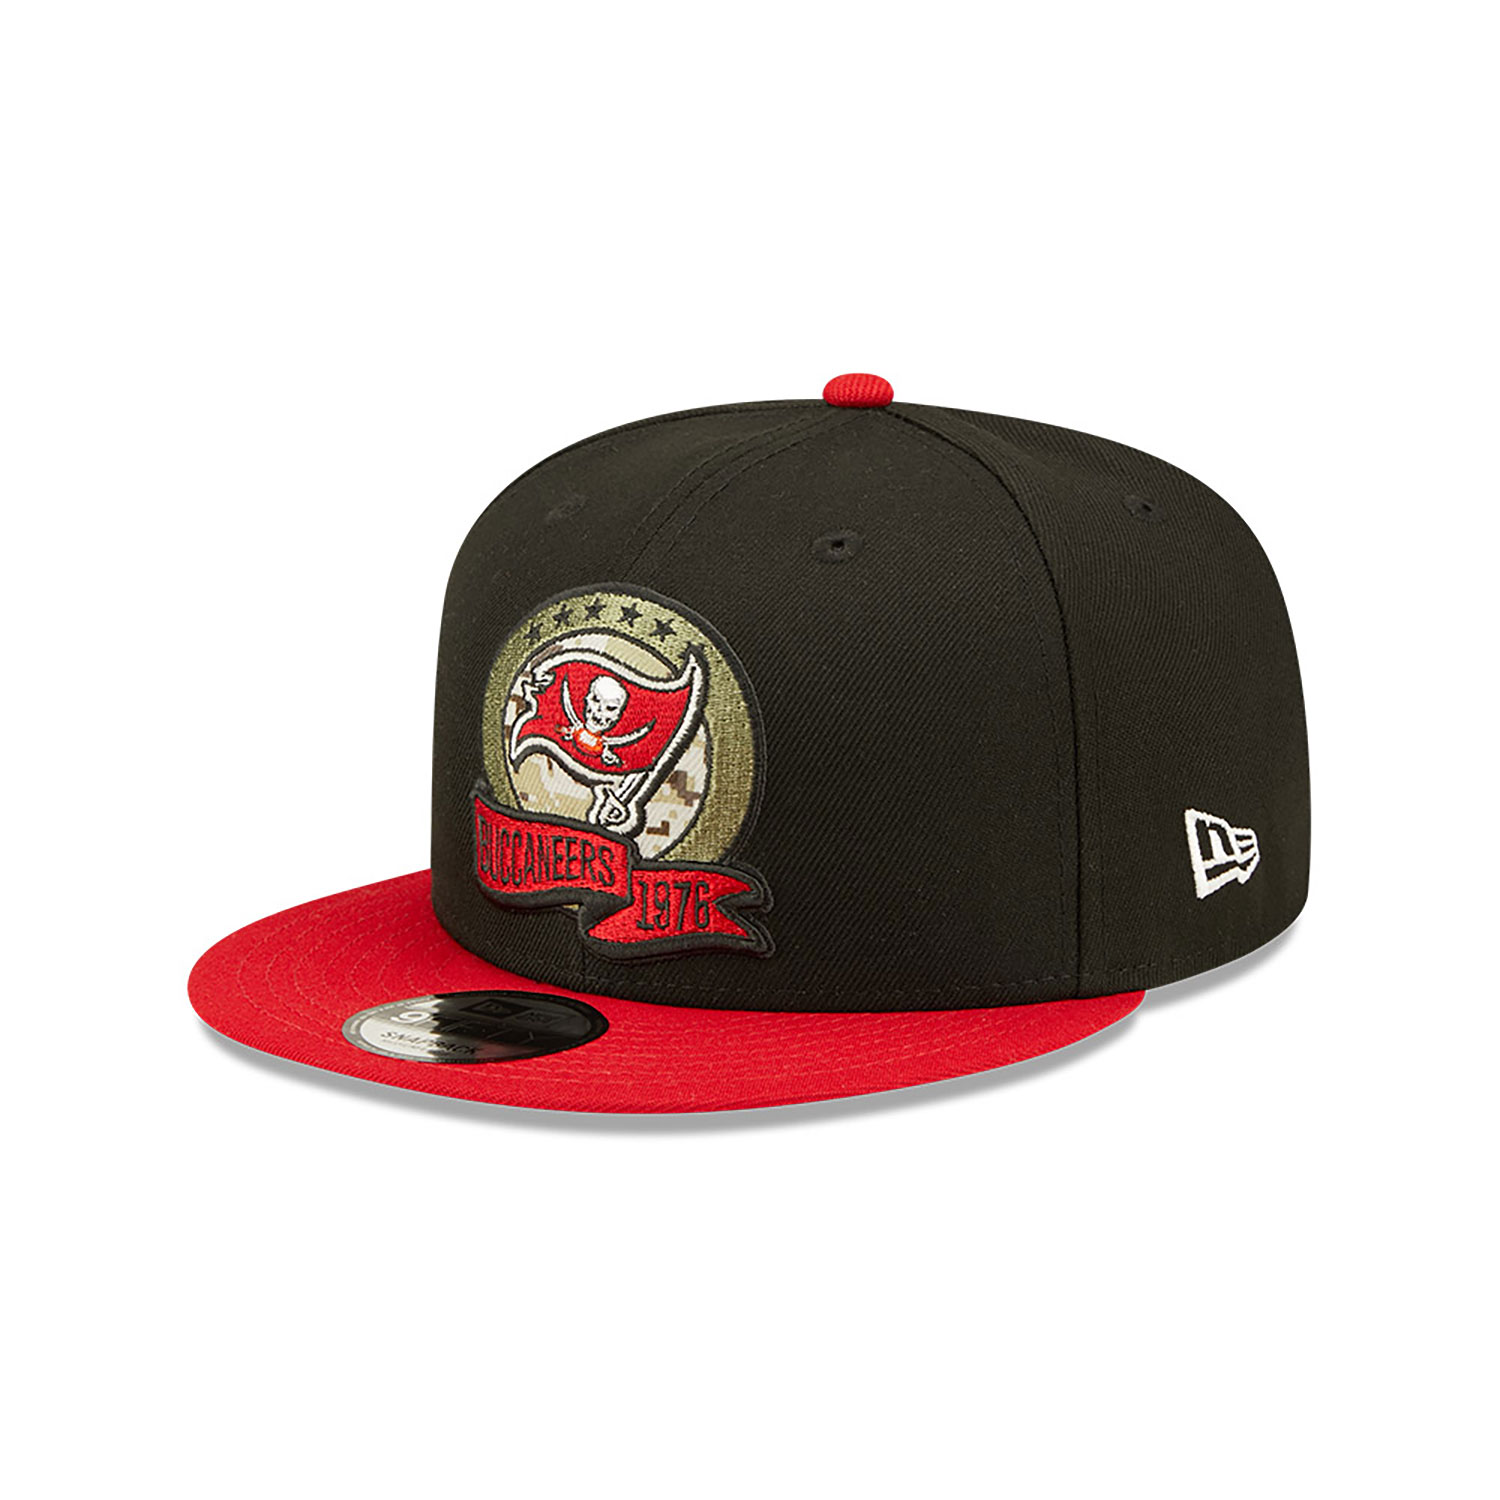 Tampa Bay Buccaneers NFL Salute to Service Black 9FIFTY Snapback Cap